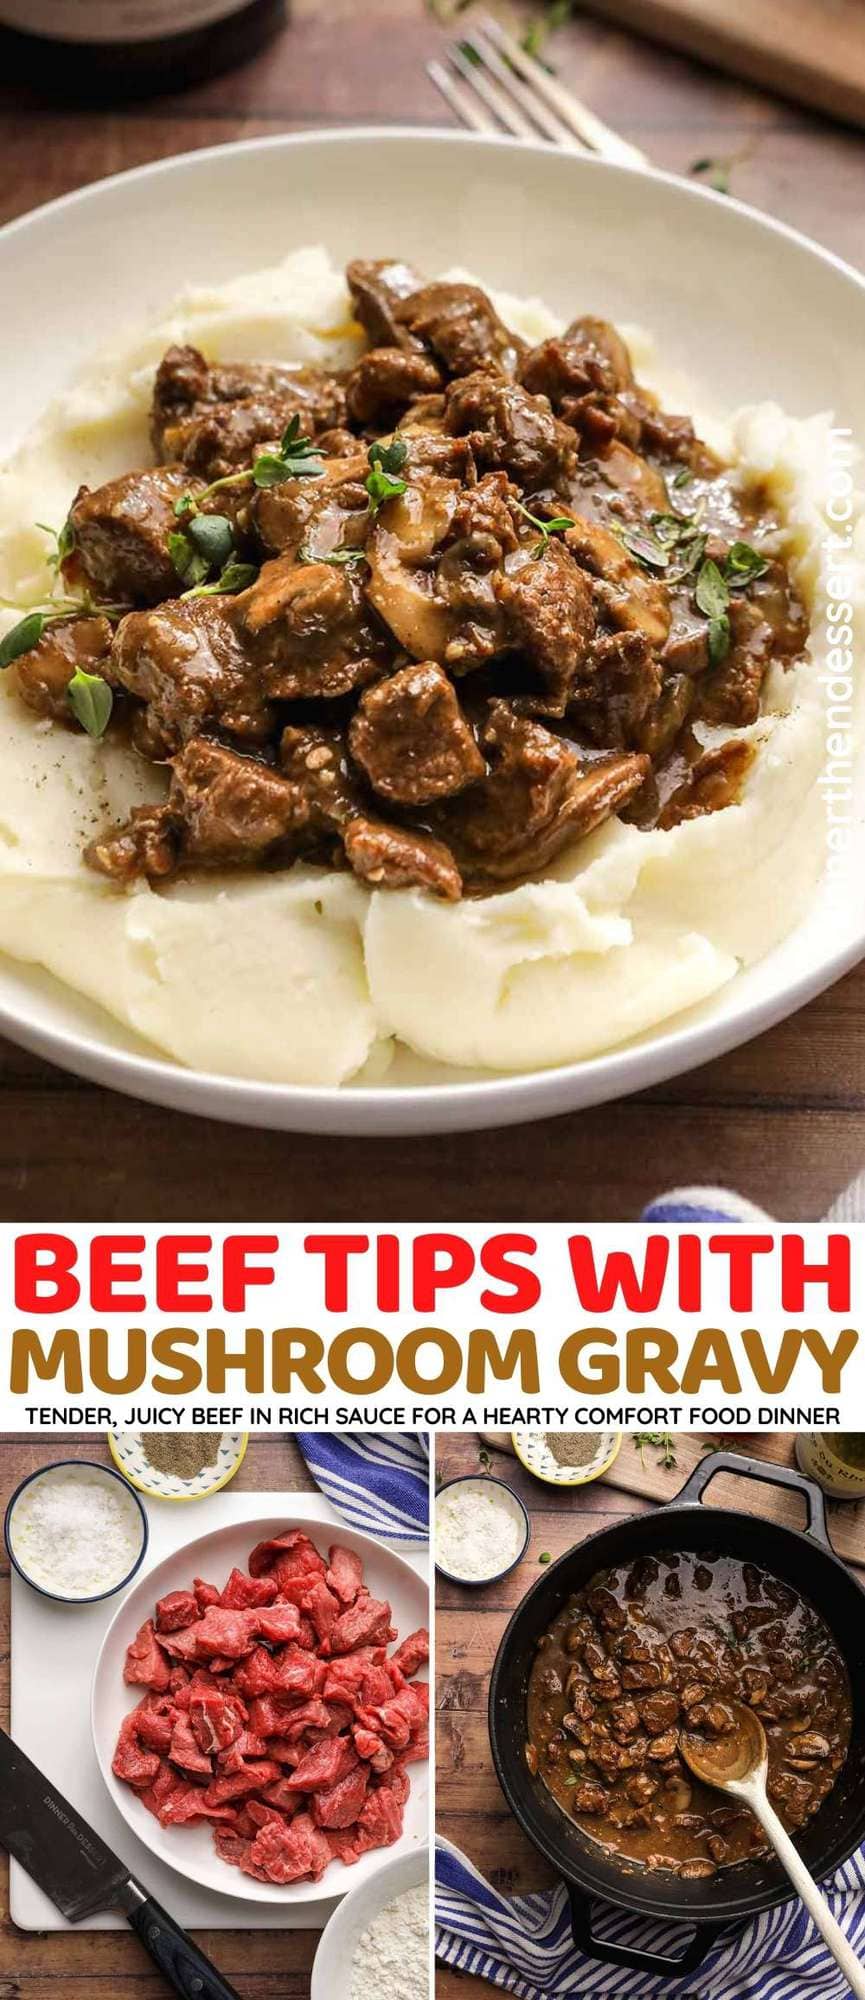 Beef Tips with Mushroom Gravy collage